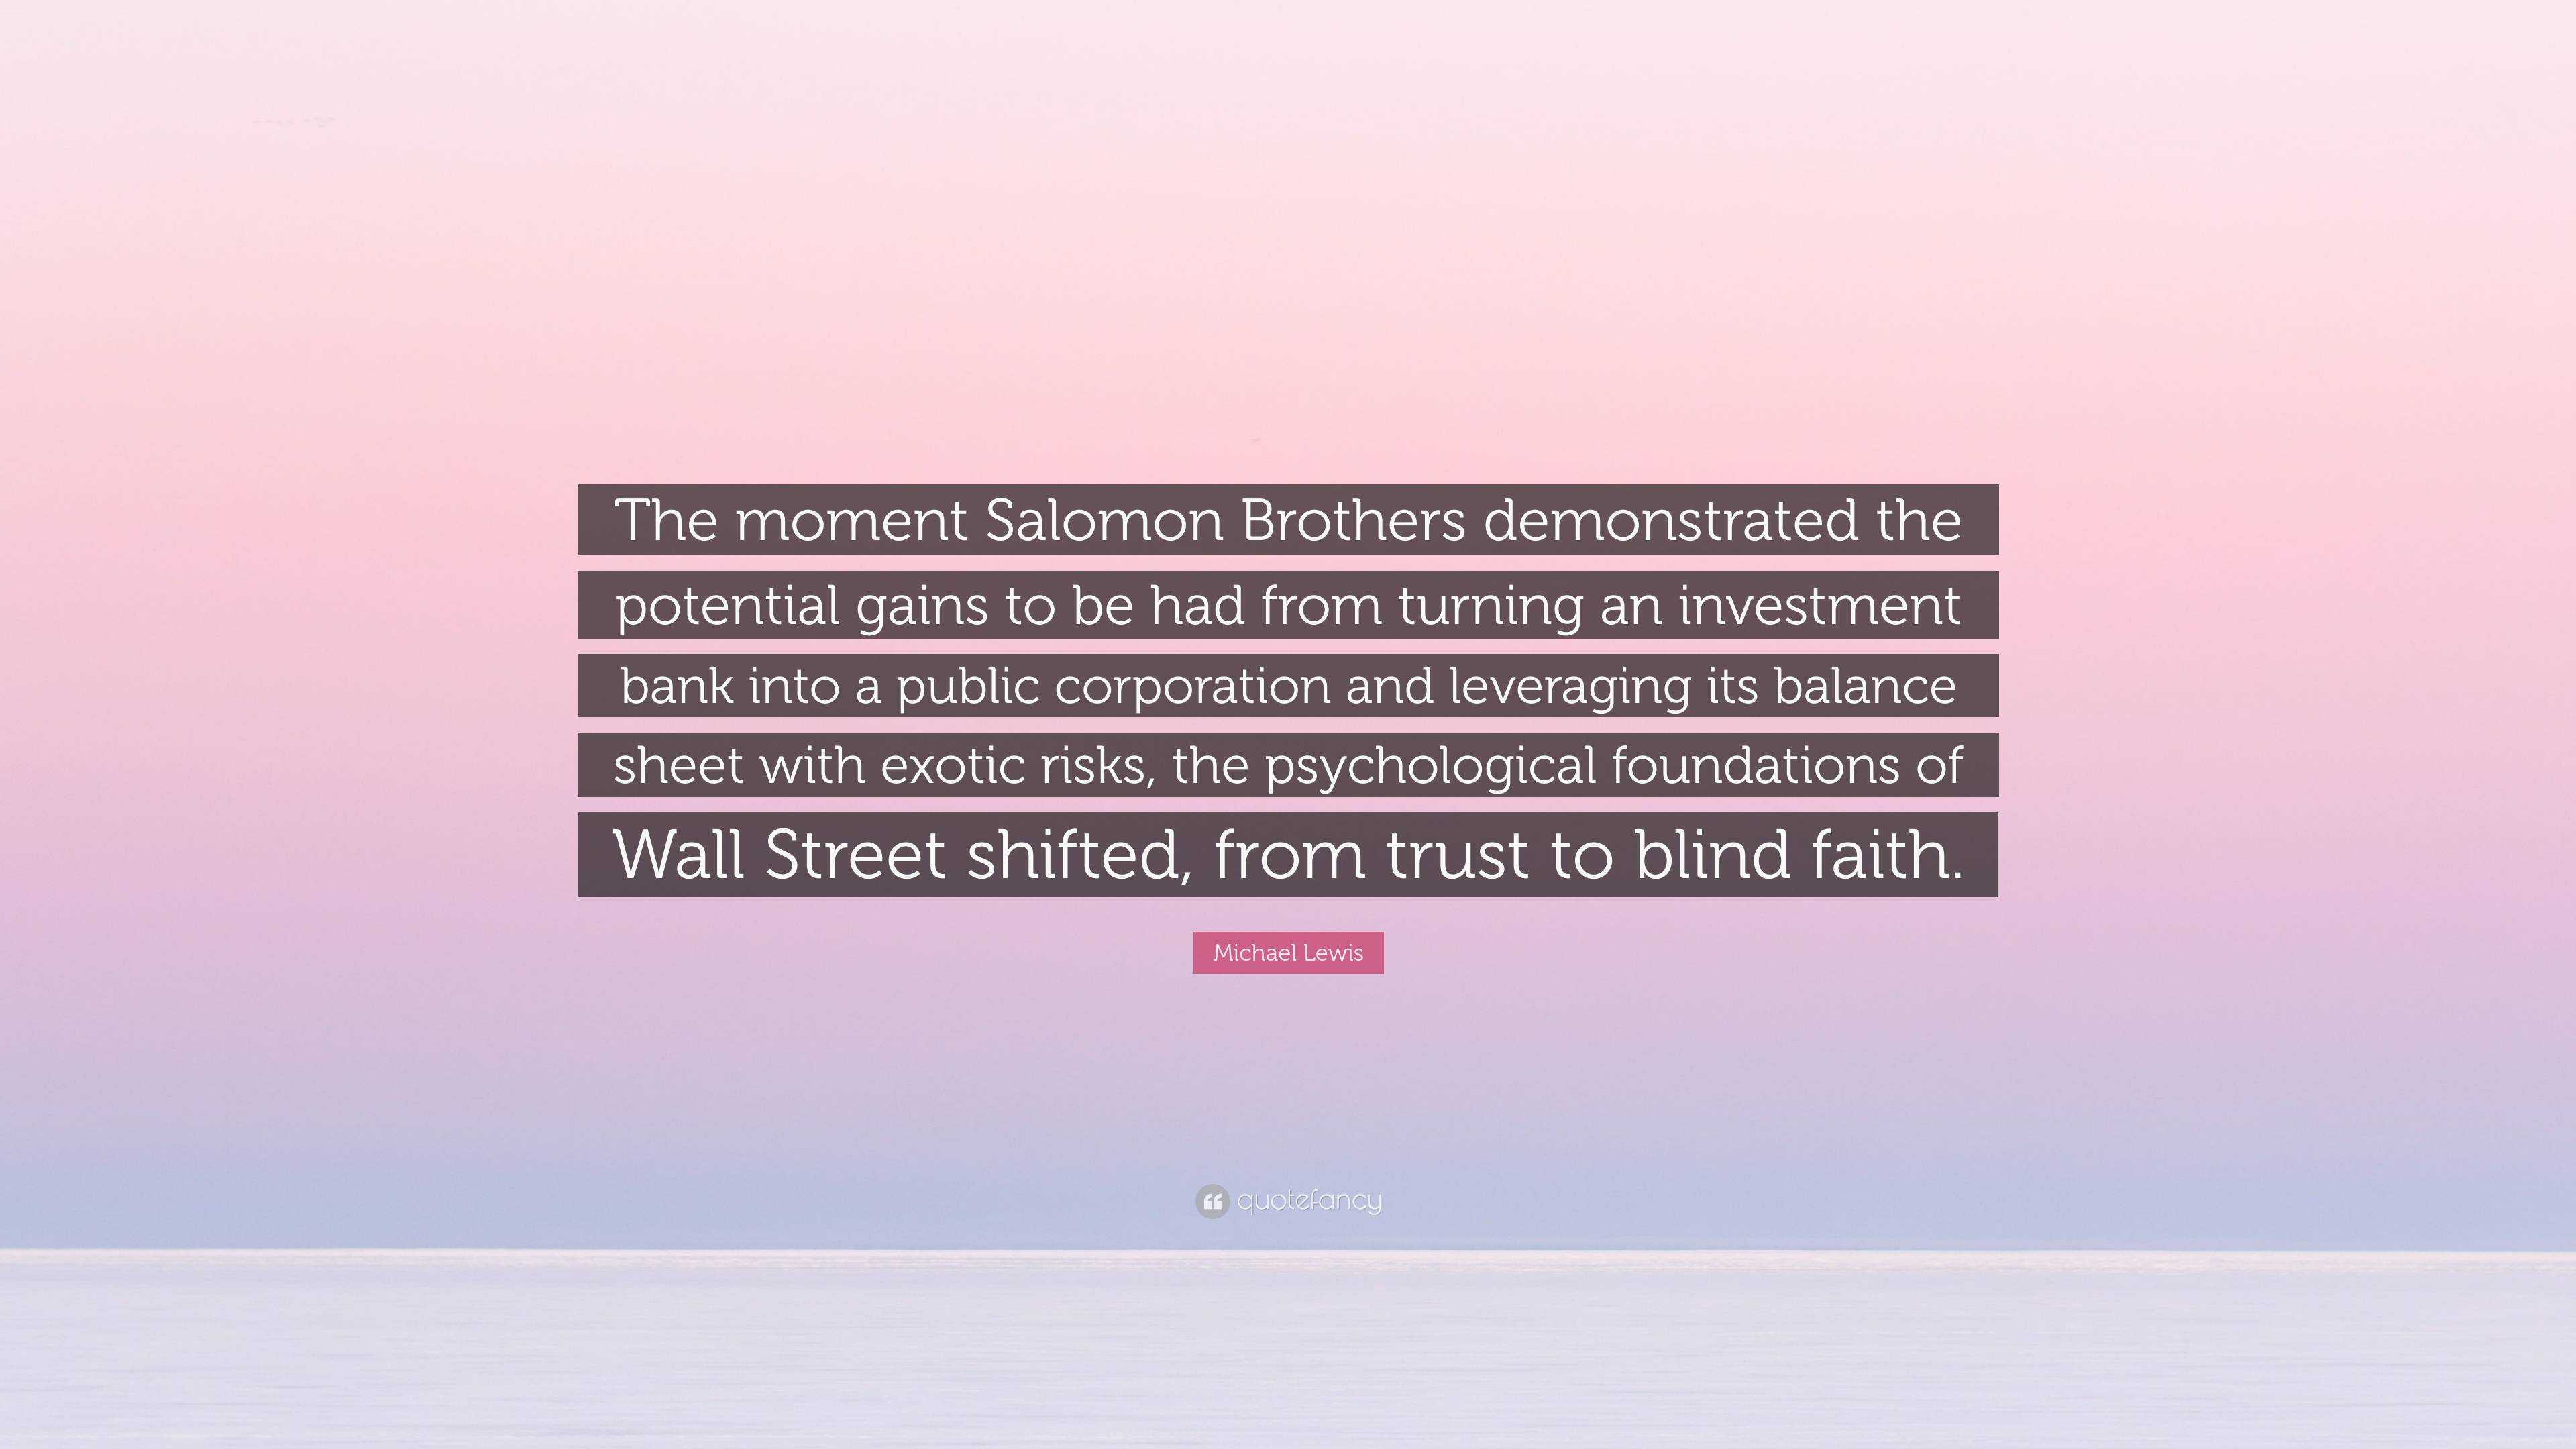 Echt Psychologisch Misschien Michael Lewis Quote: “The moment Salomon Brothers demonstrated the  potential gains to be had from turning an investment bank into a public  cor...”